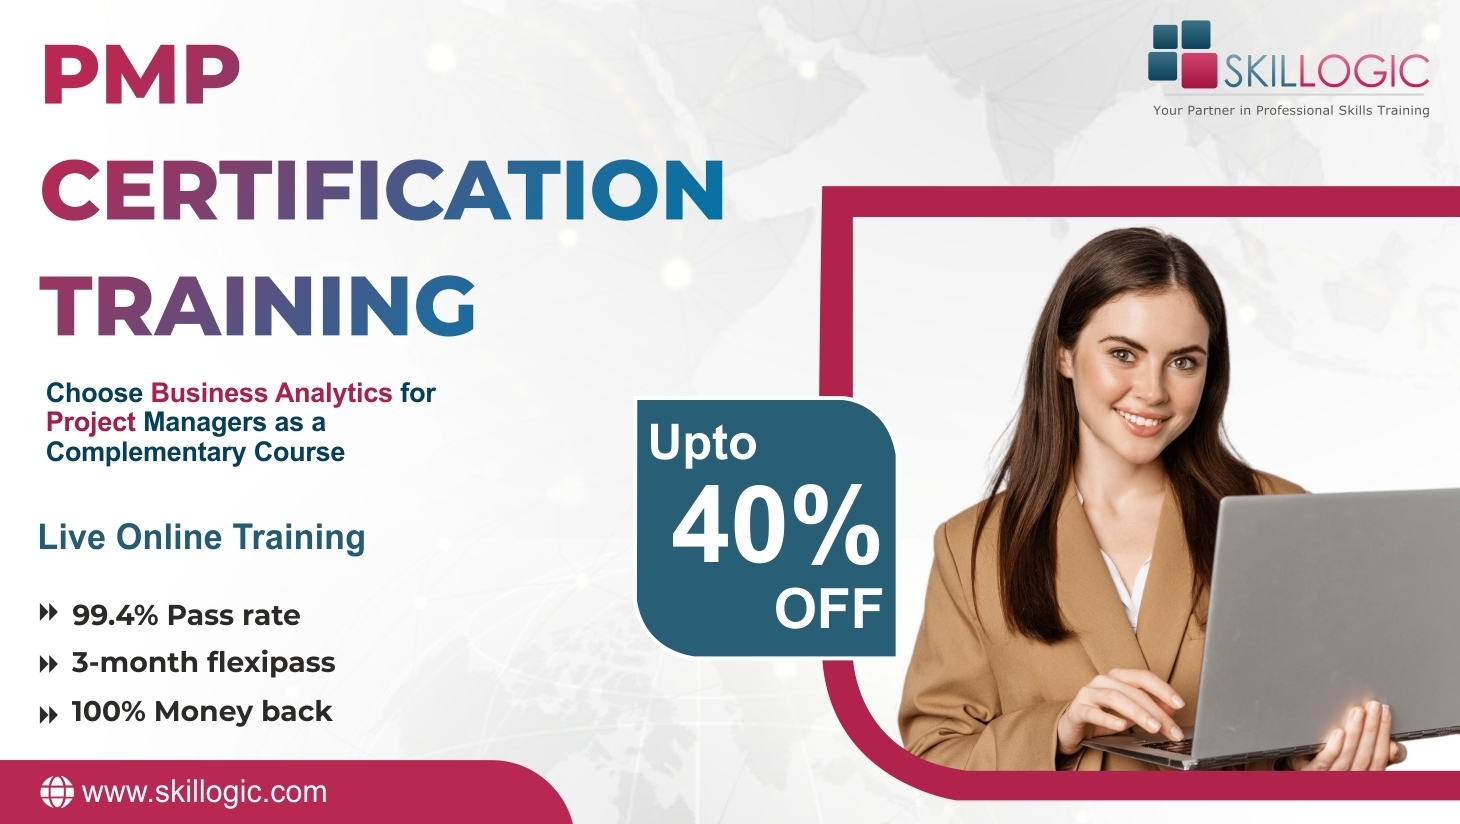 PMP Certification Training in Hyderabad, Online Event